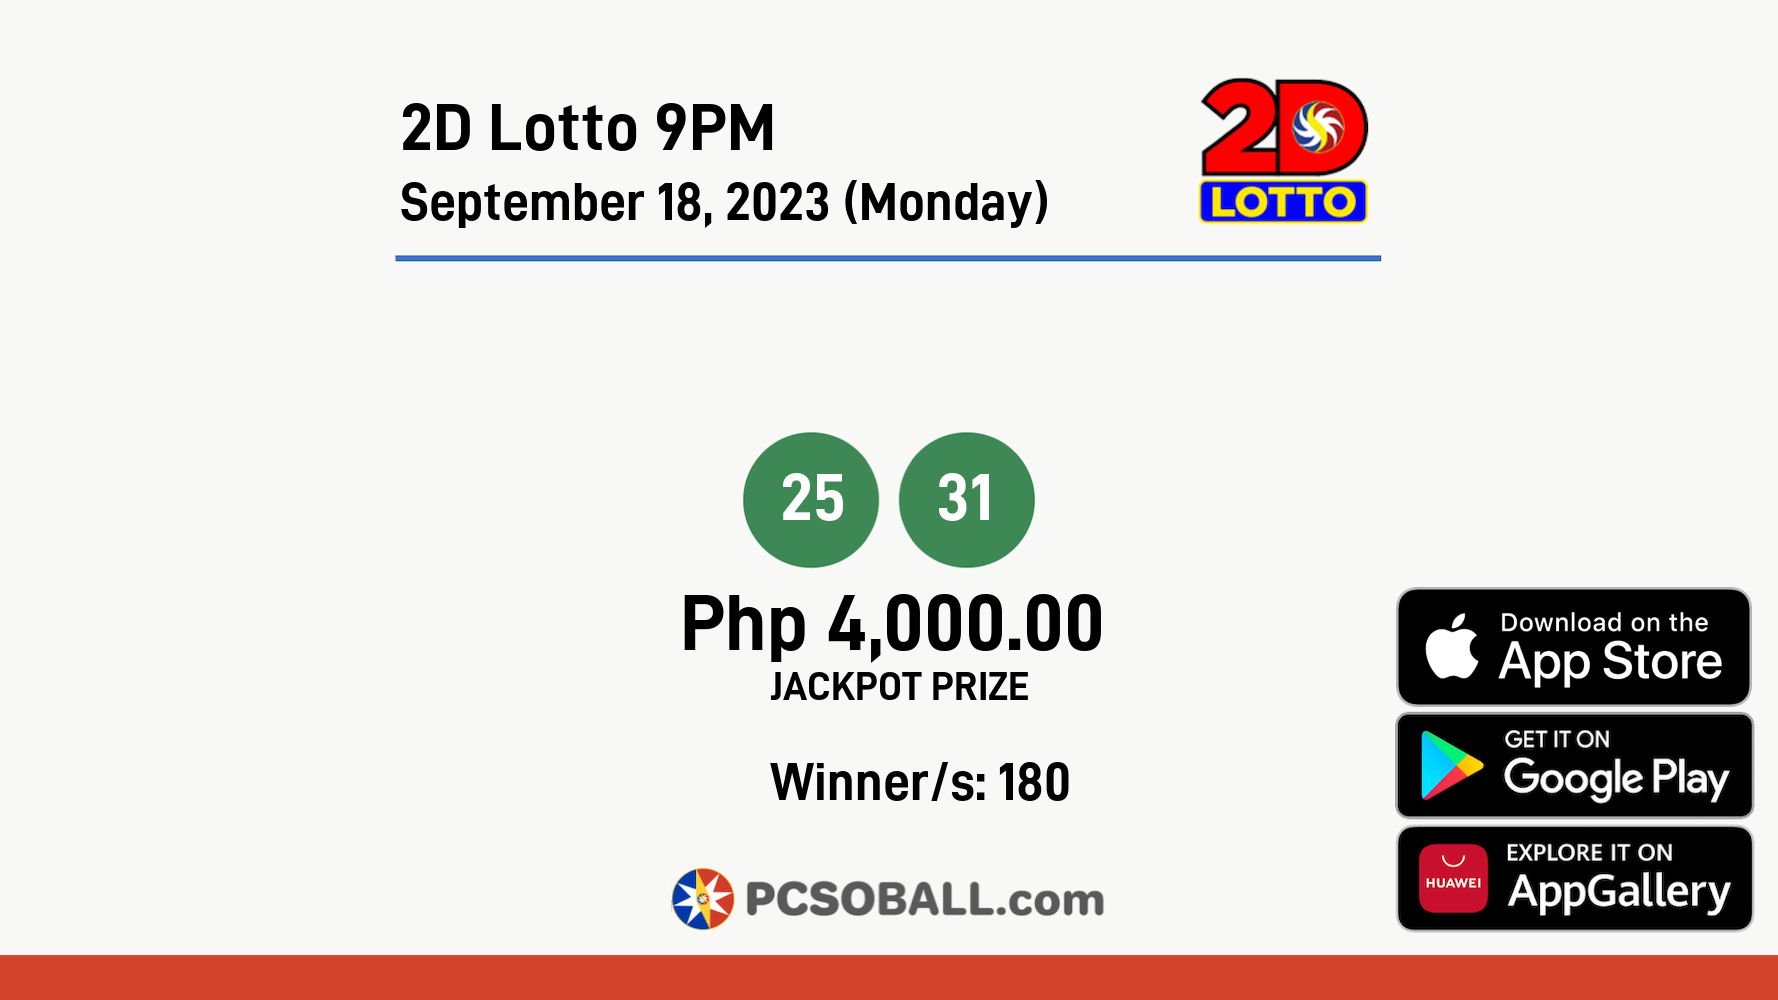 2D Lotto 9PM September 18, 2023 (Monday) Result